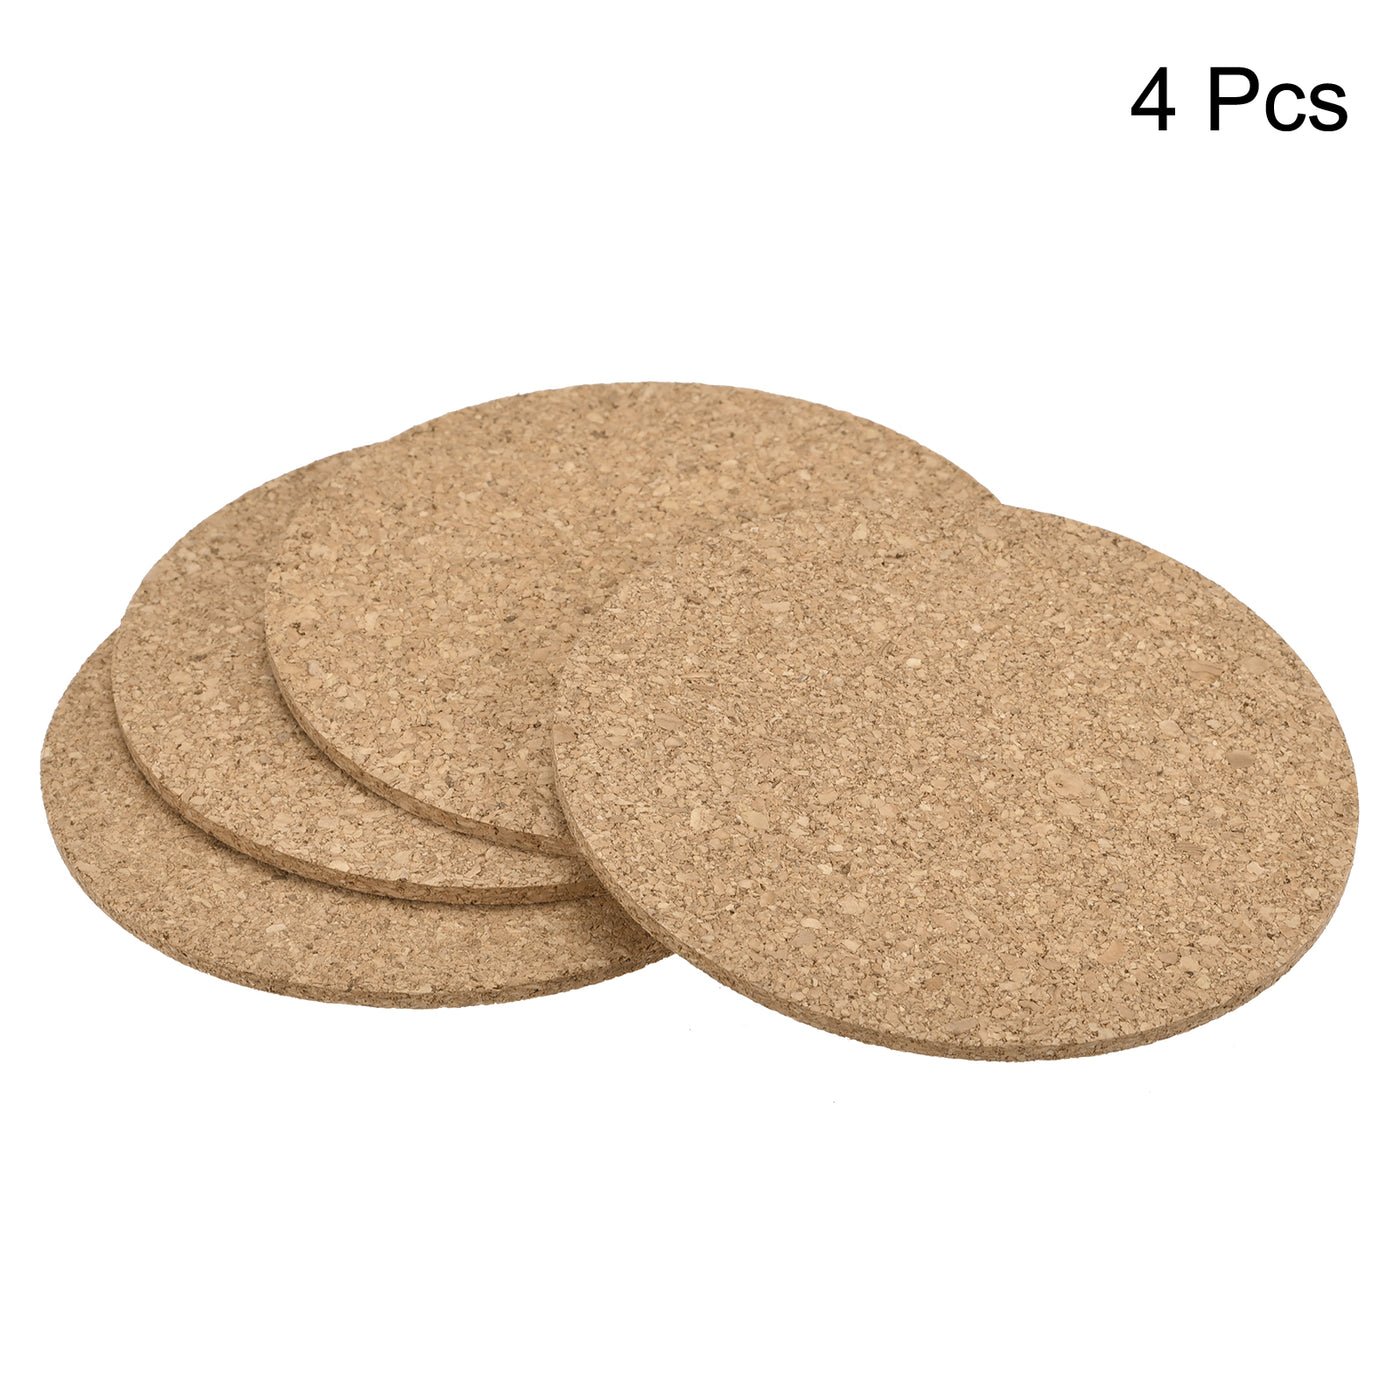 uxcell Uxcell 100mm(3.94") Round Coasters 3mm Thick Cork Cup Mat Pad for Tableware 4pcs